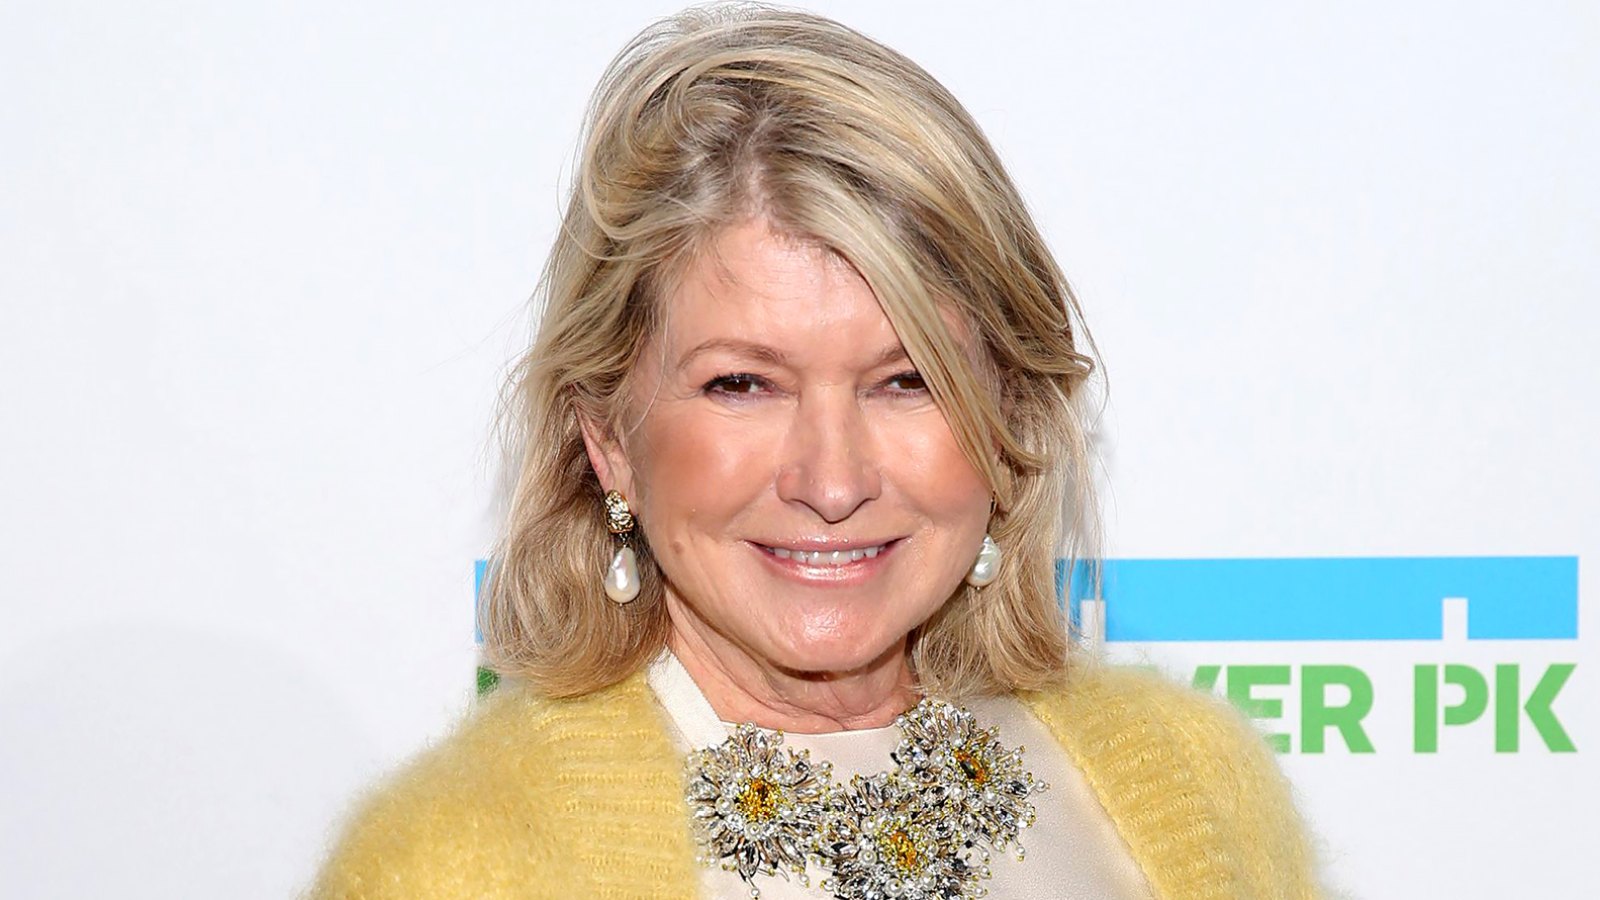 Martha Stewart Shares Her ‘Fun and Festive’ Easter Tradition